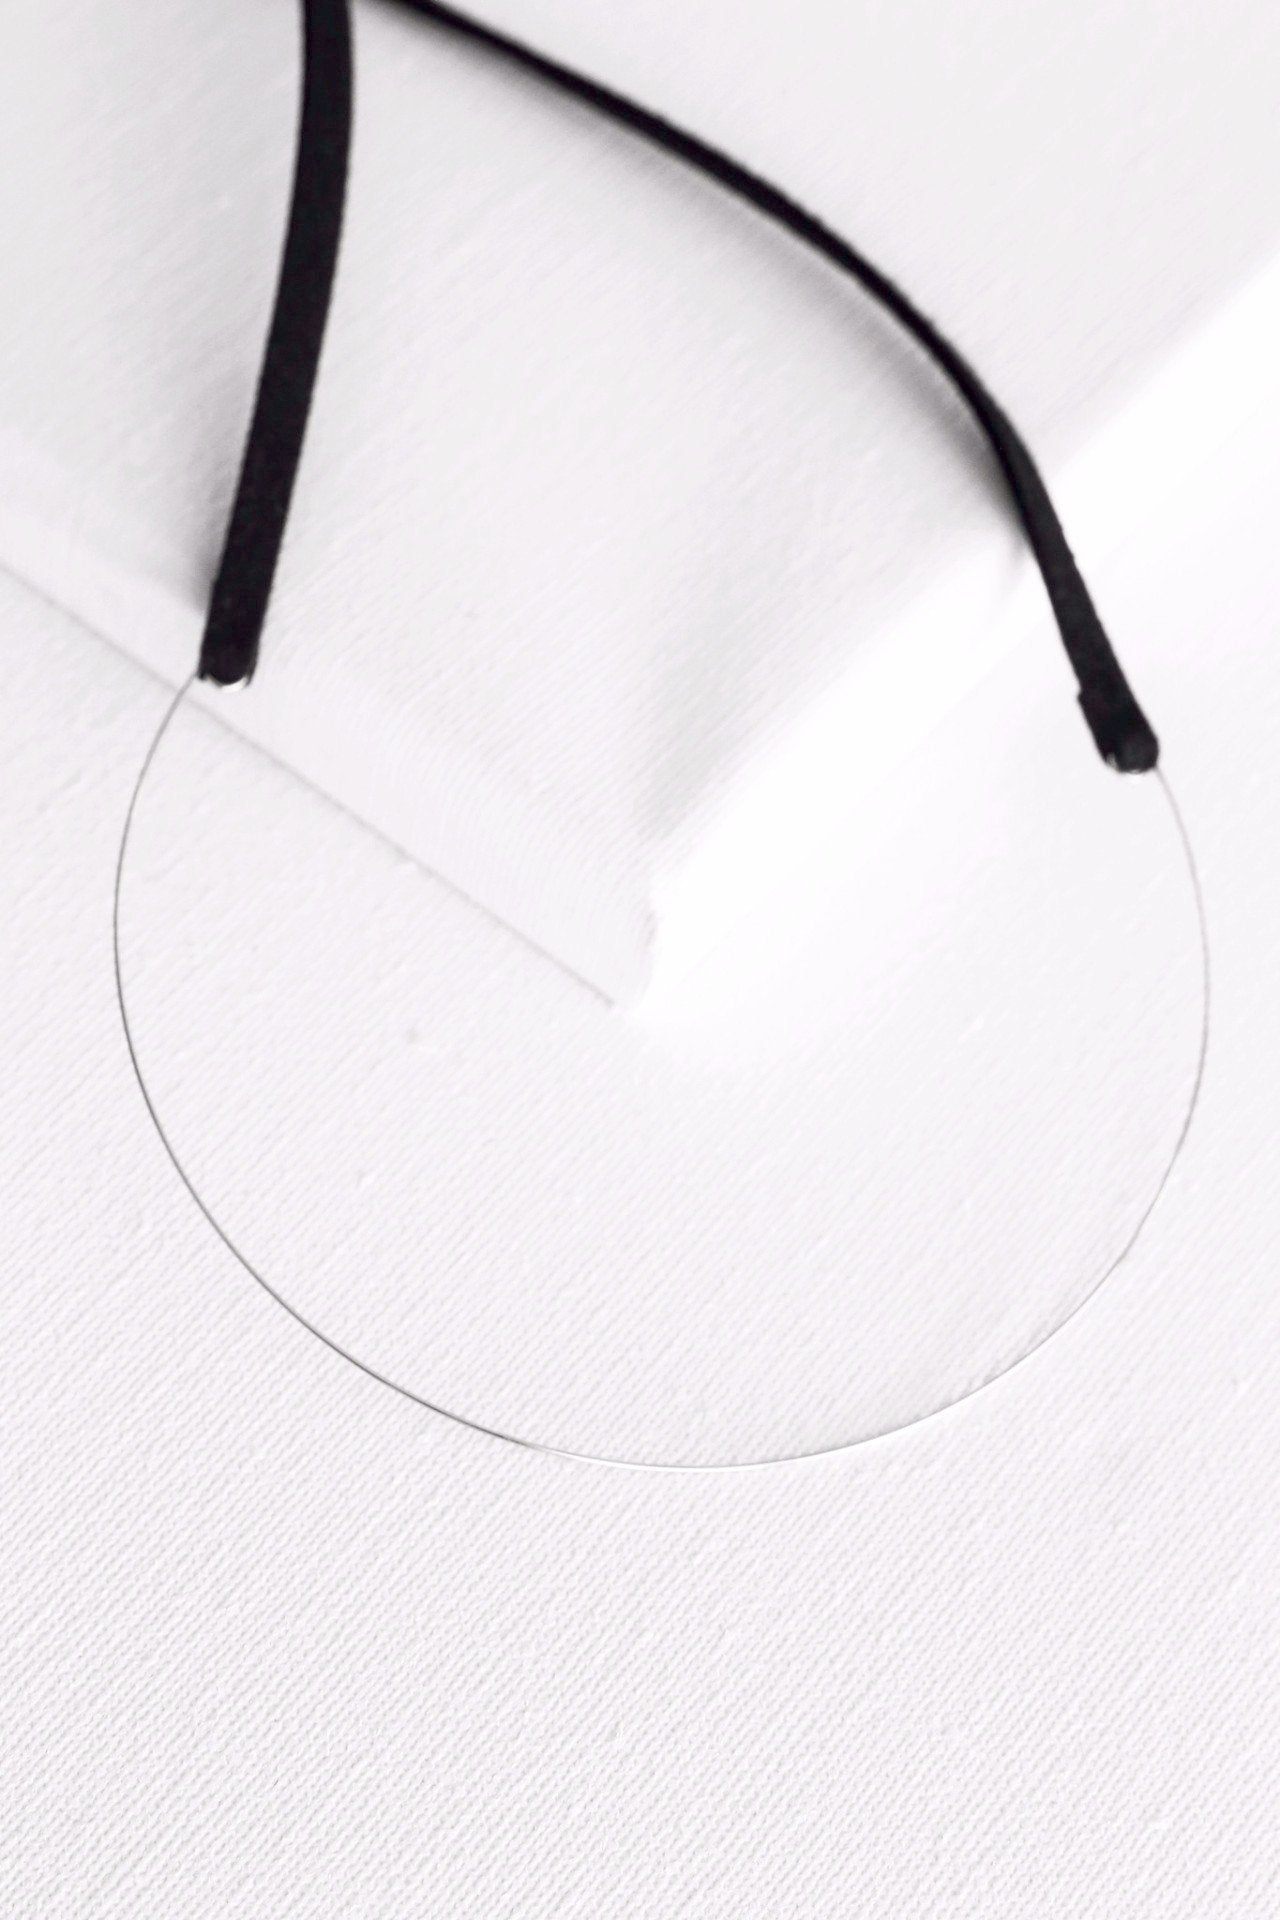 Suede Classic Choker - Boutique Minimaliste has waterproof, durable, elegant and vintage inspired jewelry